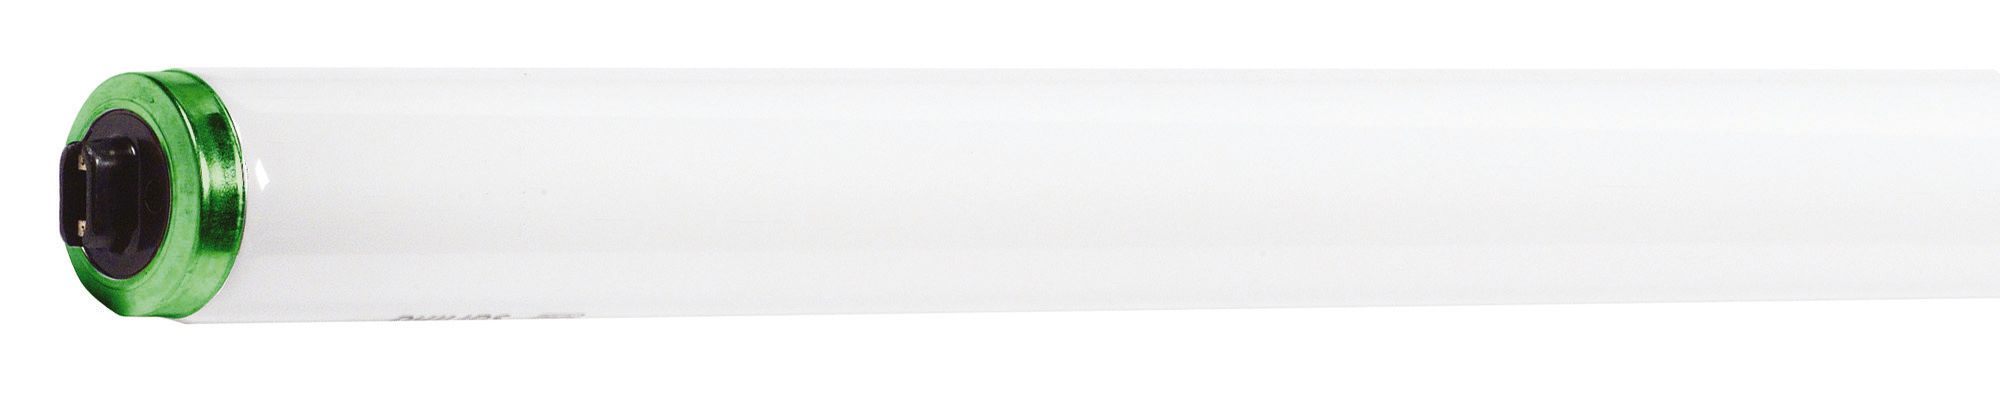 381764 Linear Compact Fluorescent Lamp Philips Lighting;Signify Lamps